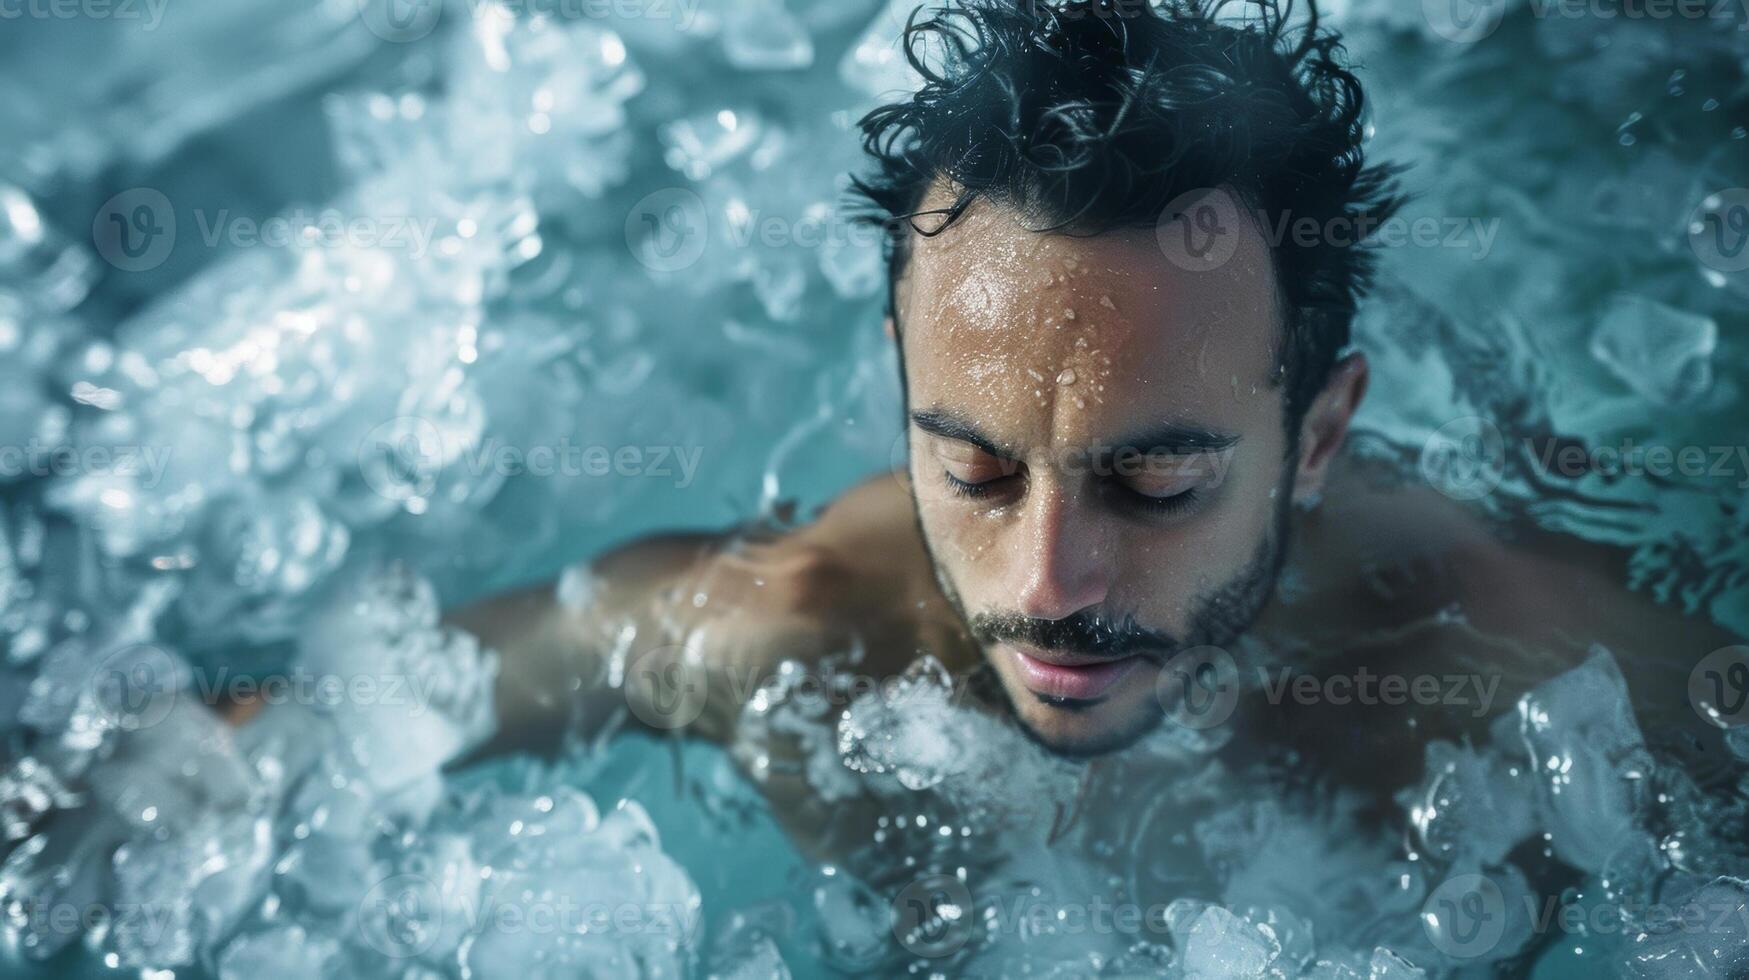 A man dives into an ice bath his body submerged in freezing water up to his neck his expression determined and focused. photo